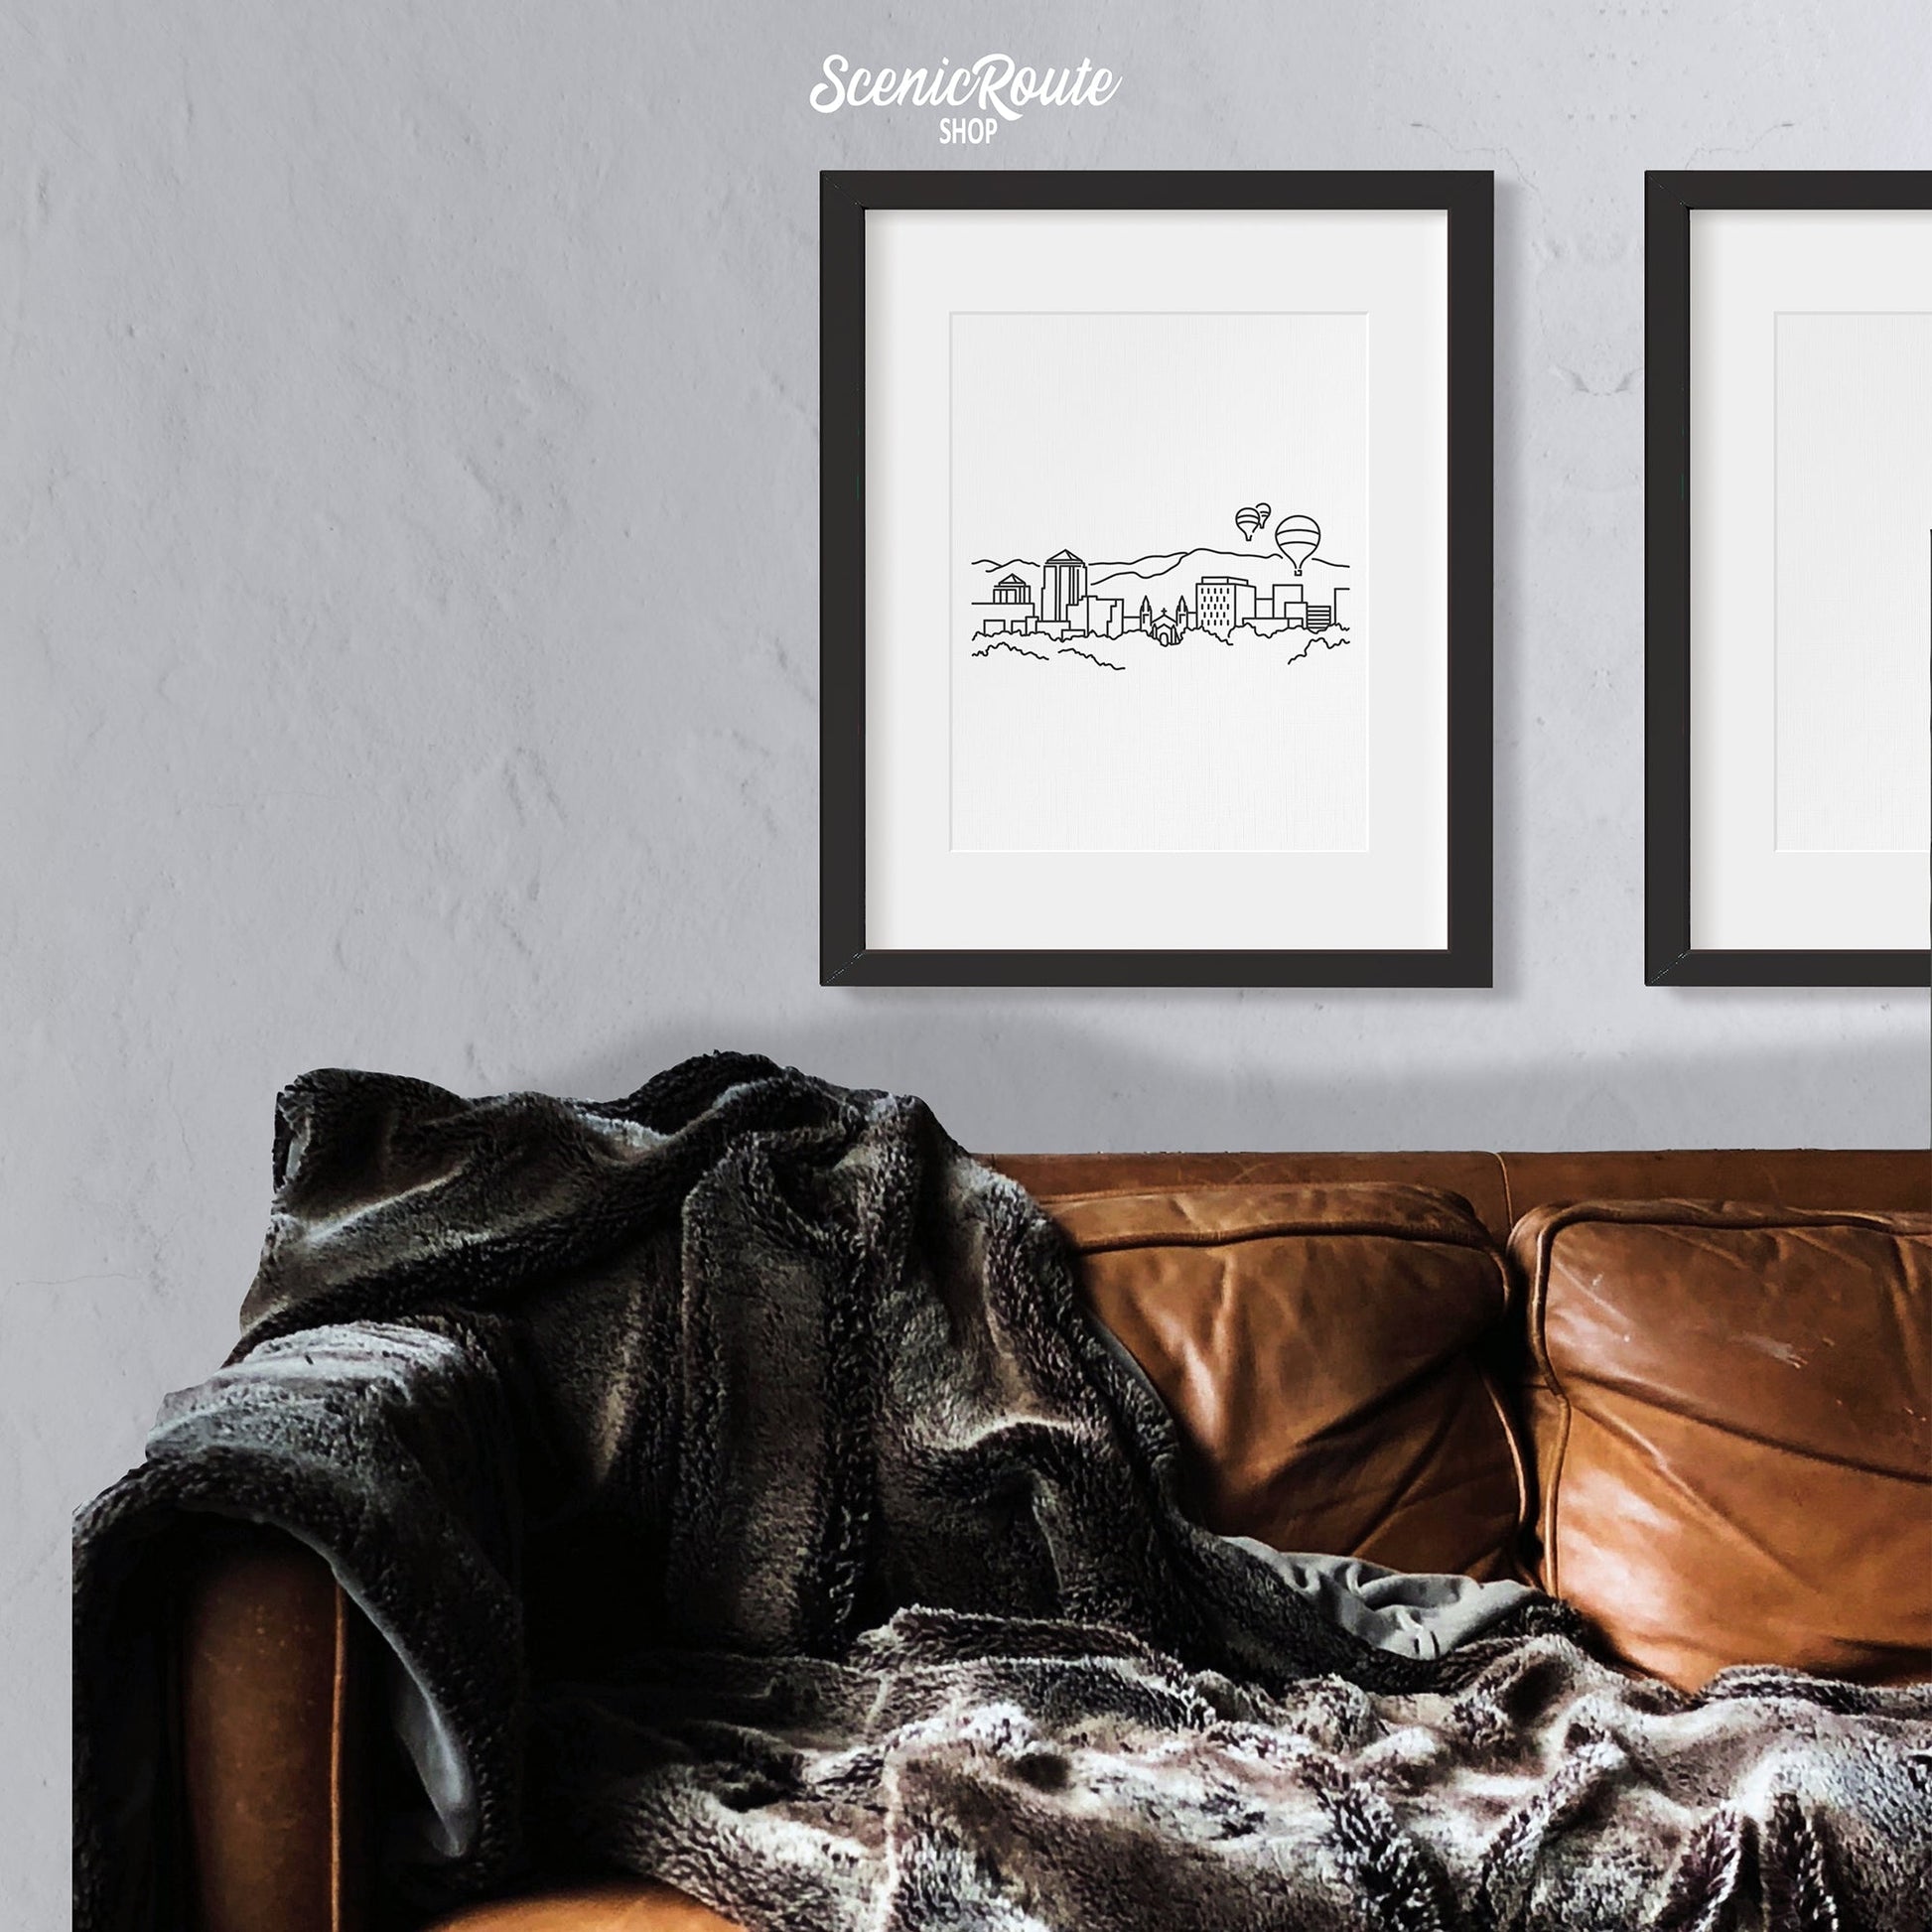 A framed line art drawing of the Albuquerque Skyline hung above a couch with a blanket